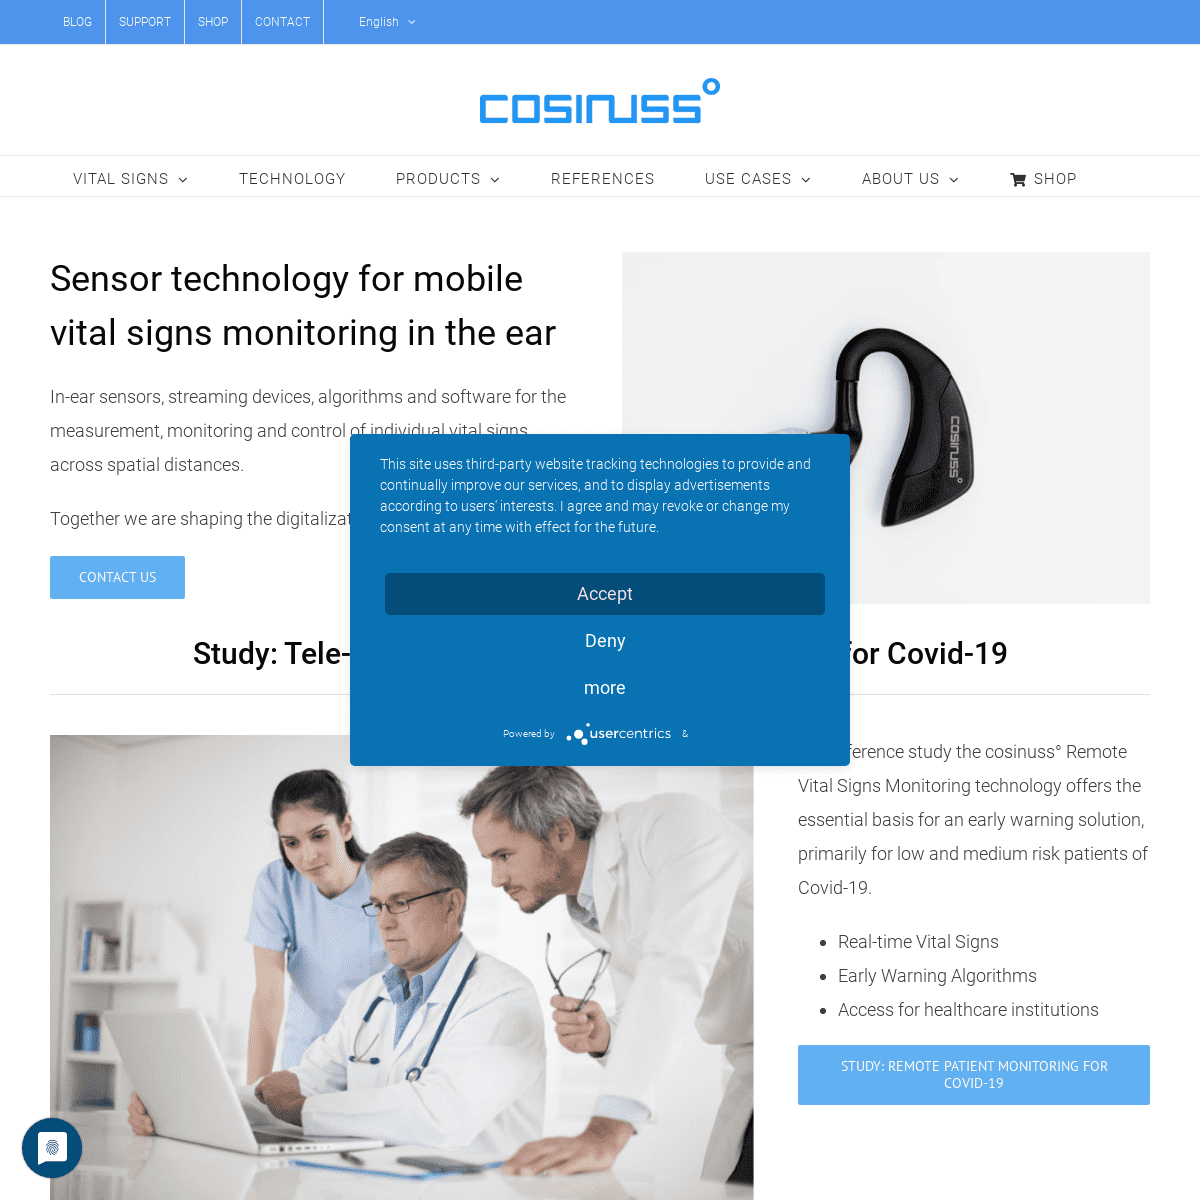 A complete backup of https://cosinuss.com